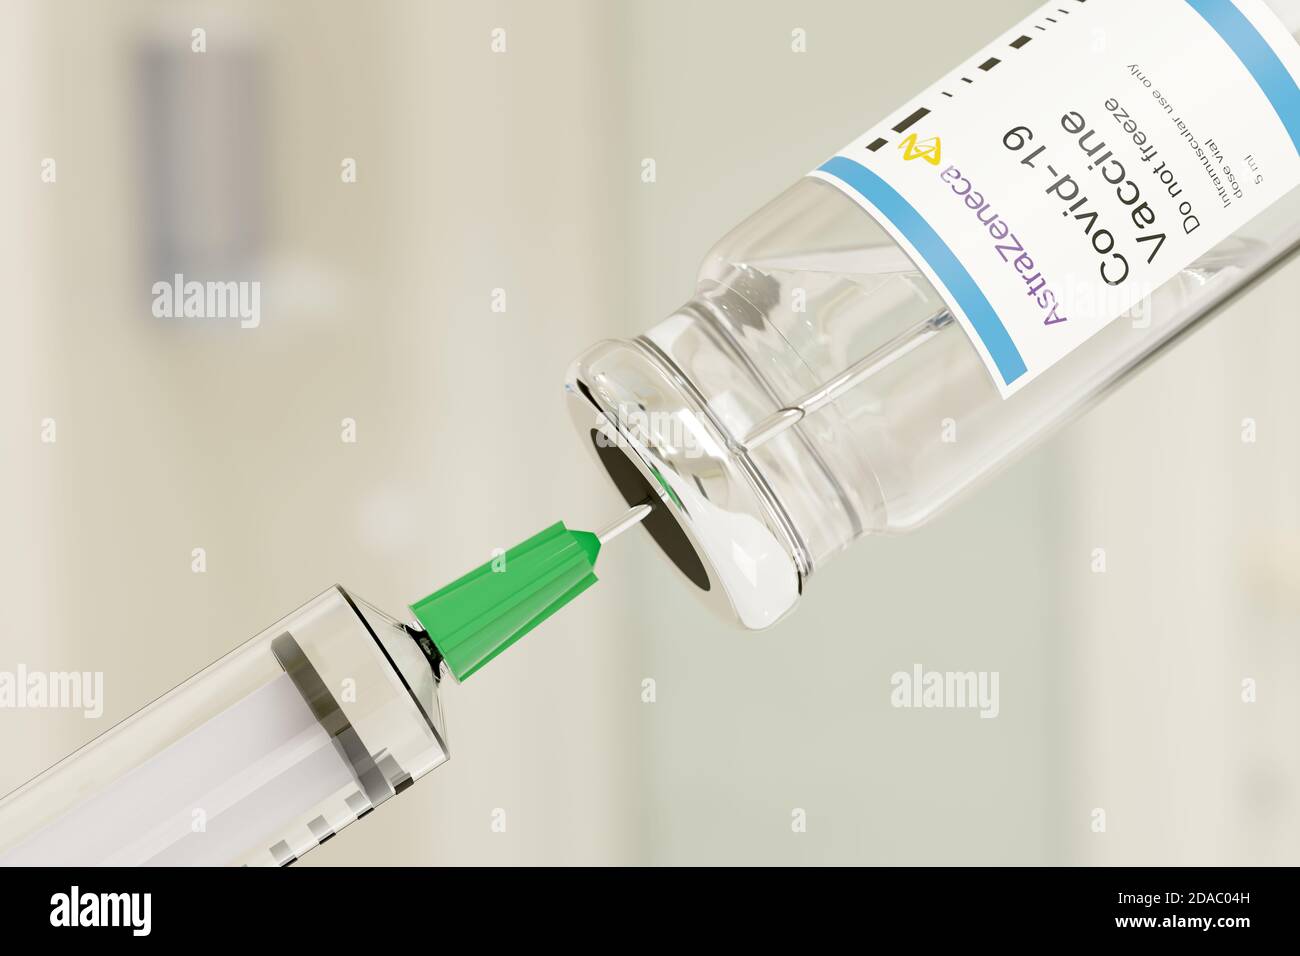 Buenos Aires, Argentina - November 11: Astrazeneca Covid -19 vaccine vial and injection syringe isolated on white background. 3d illustration. Stock Photo